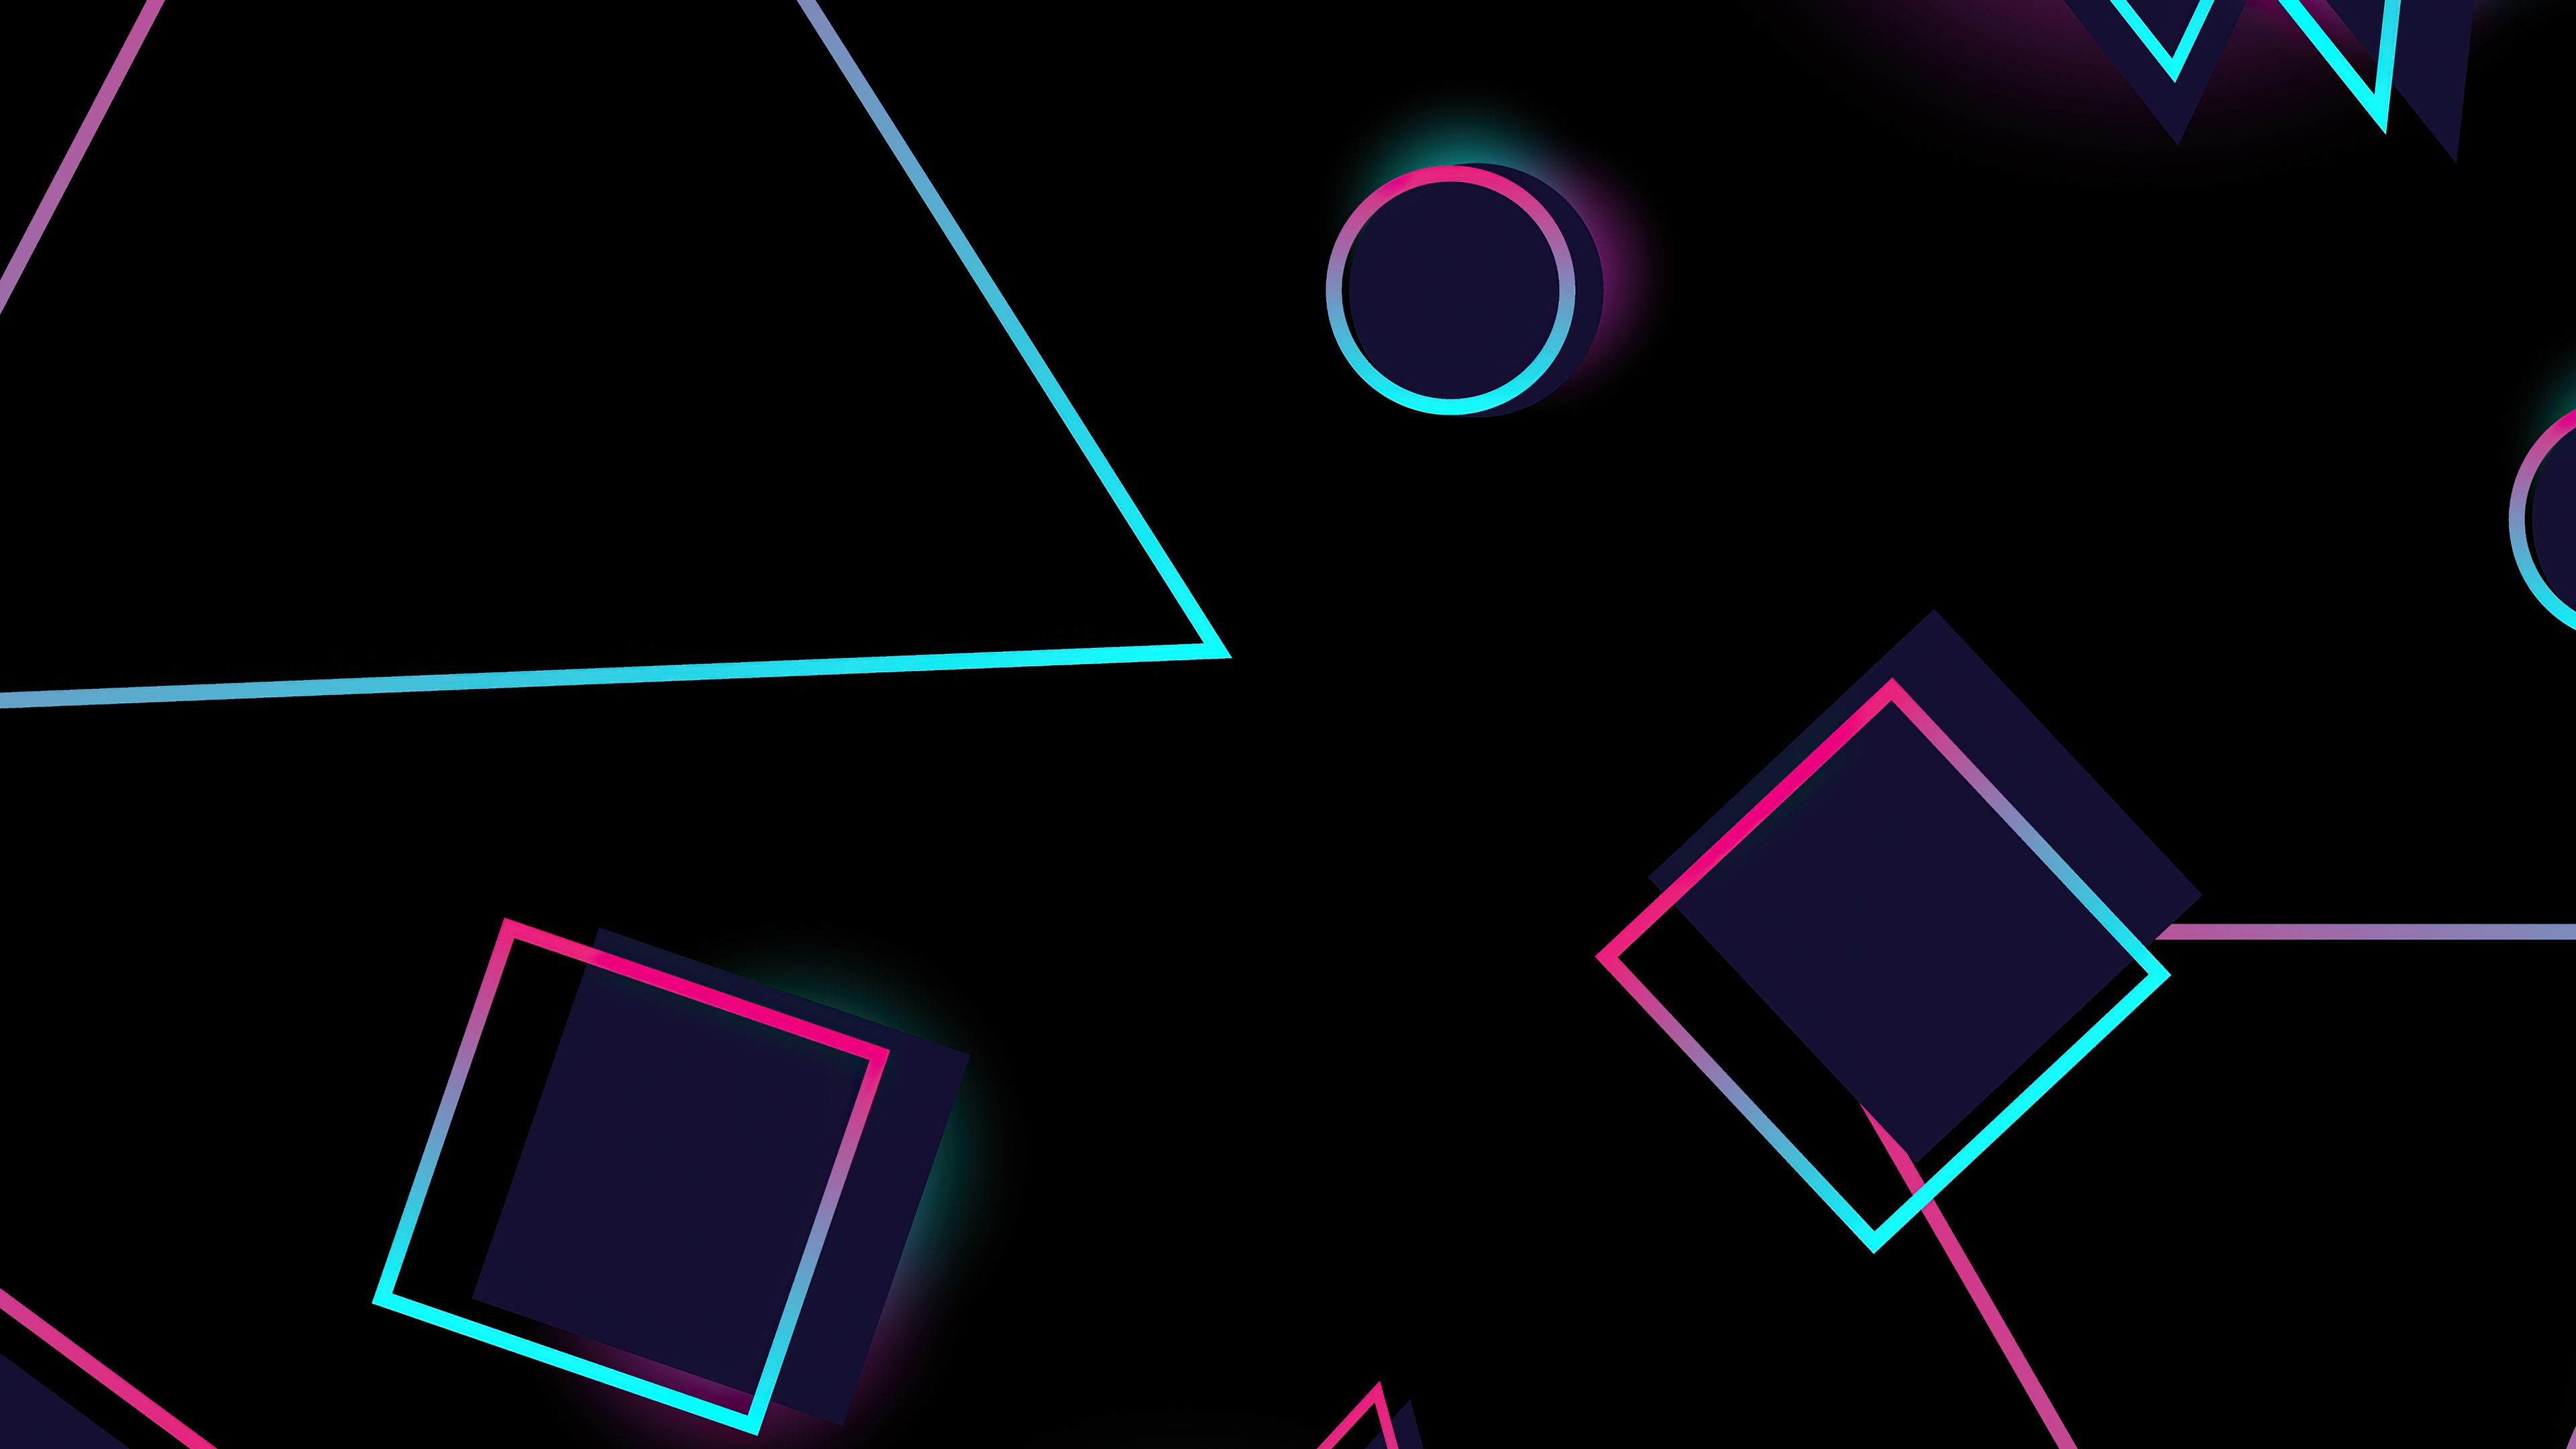 Neon Circles And Triangle 4k Neon Circles And Triangle 4k wallpaper. HD wallpaper desktop, Wallpaper, Widescreen wallpaper